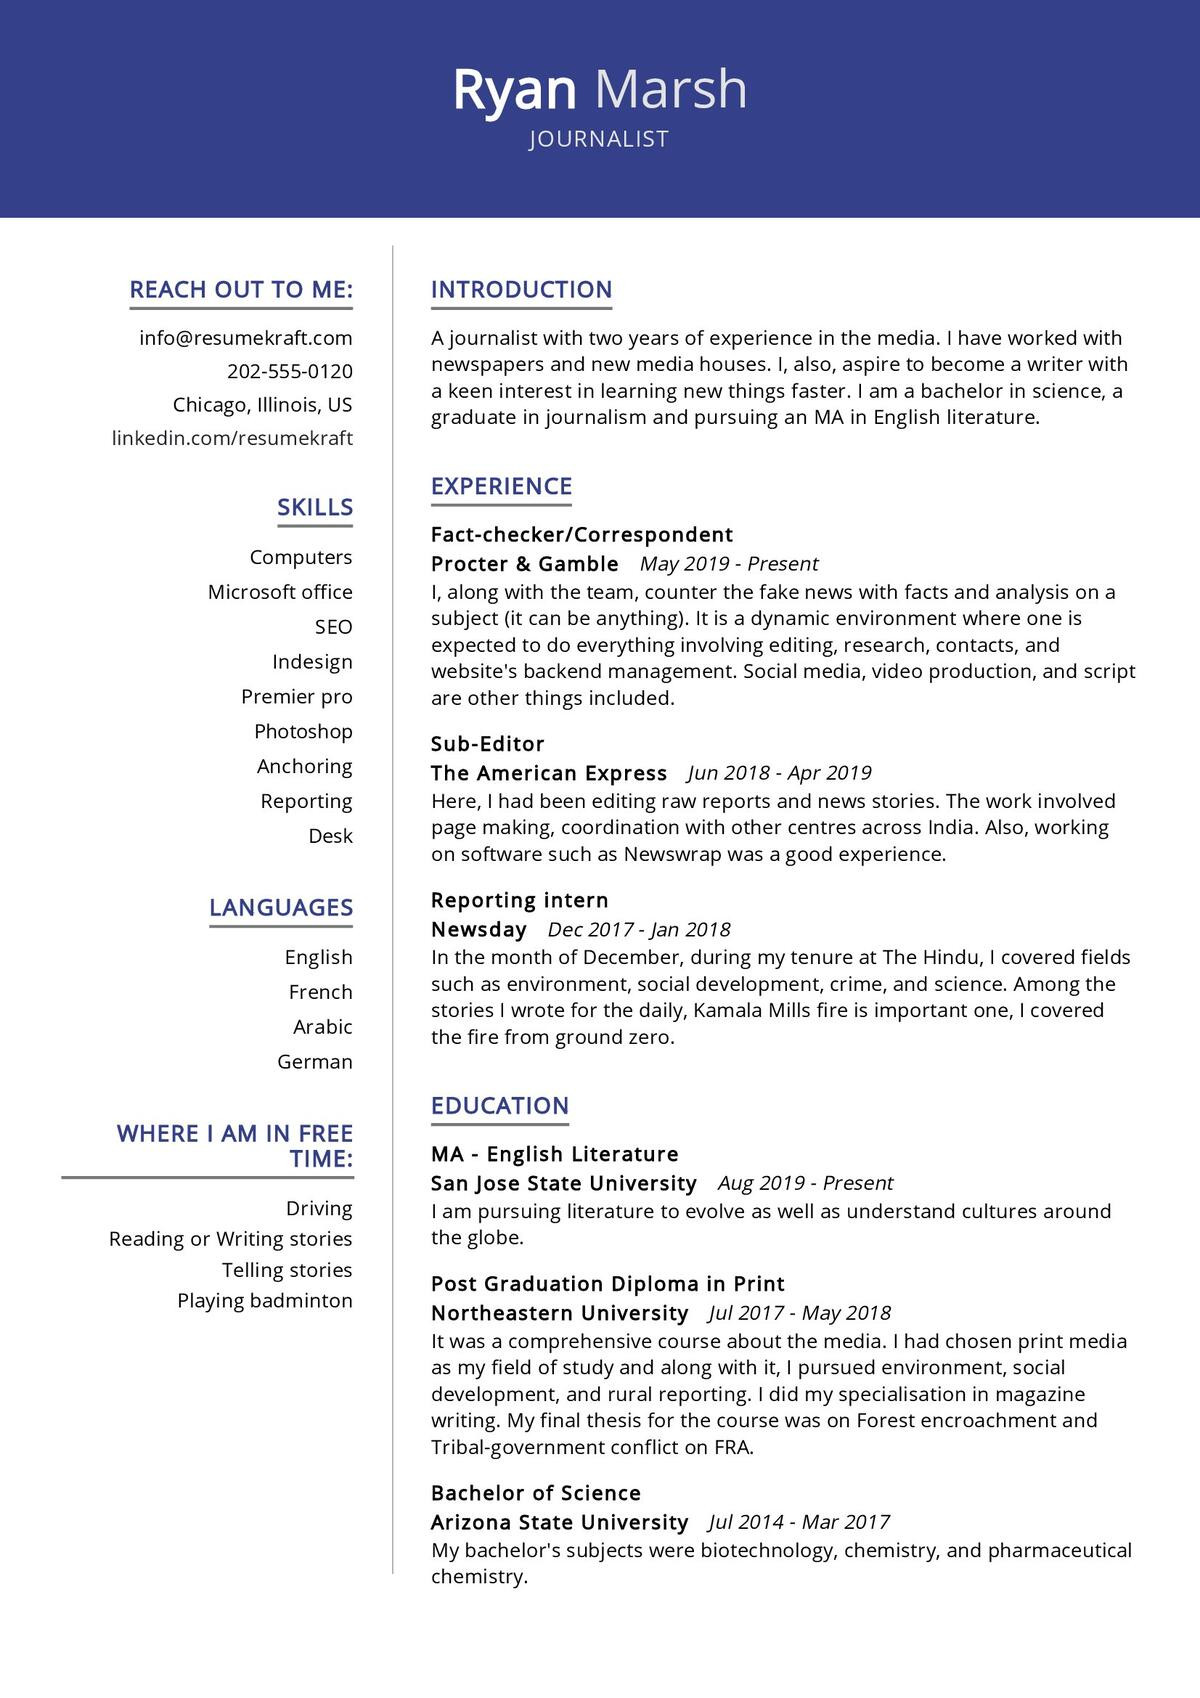 Sample Resume A Sales Manager Procter and Gamble Journalist Resume Sample 2021 Writing Guide & Tips – Resumekraft